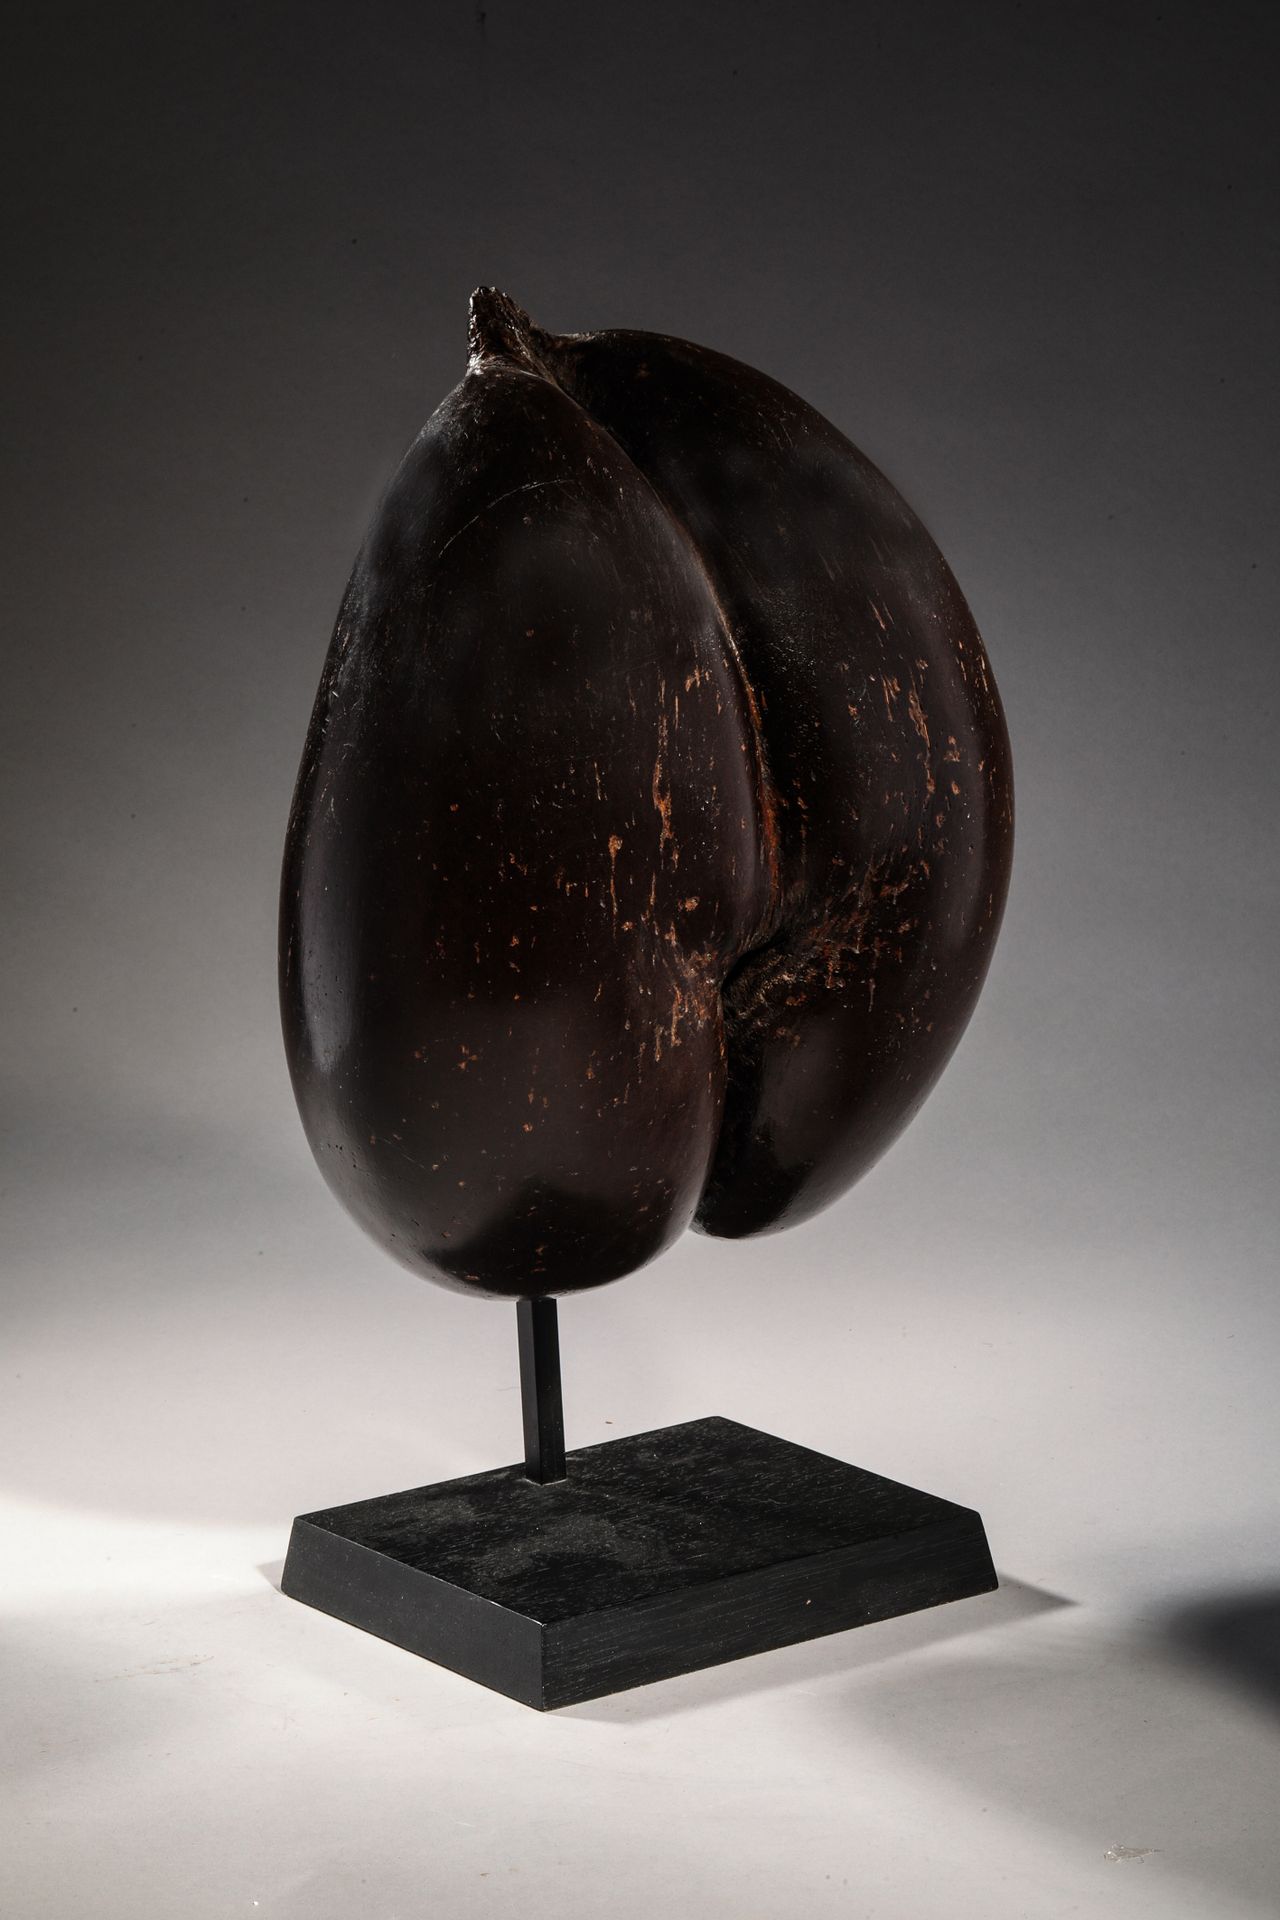 Null COCO-FESSE, fruit of the sea palms.
Seychelles XXth century
H. 32 cm